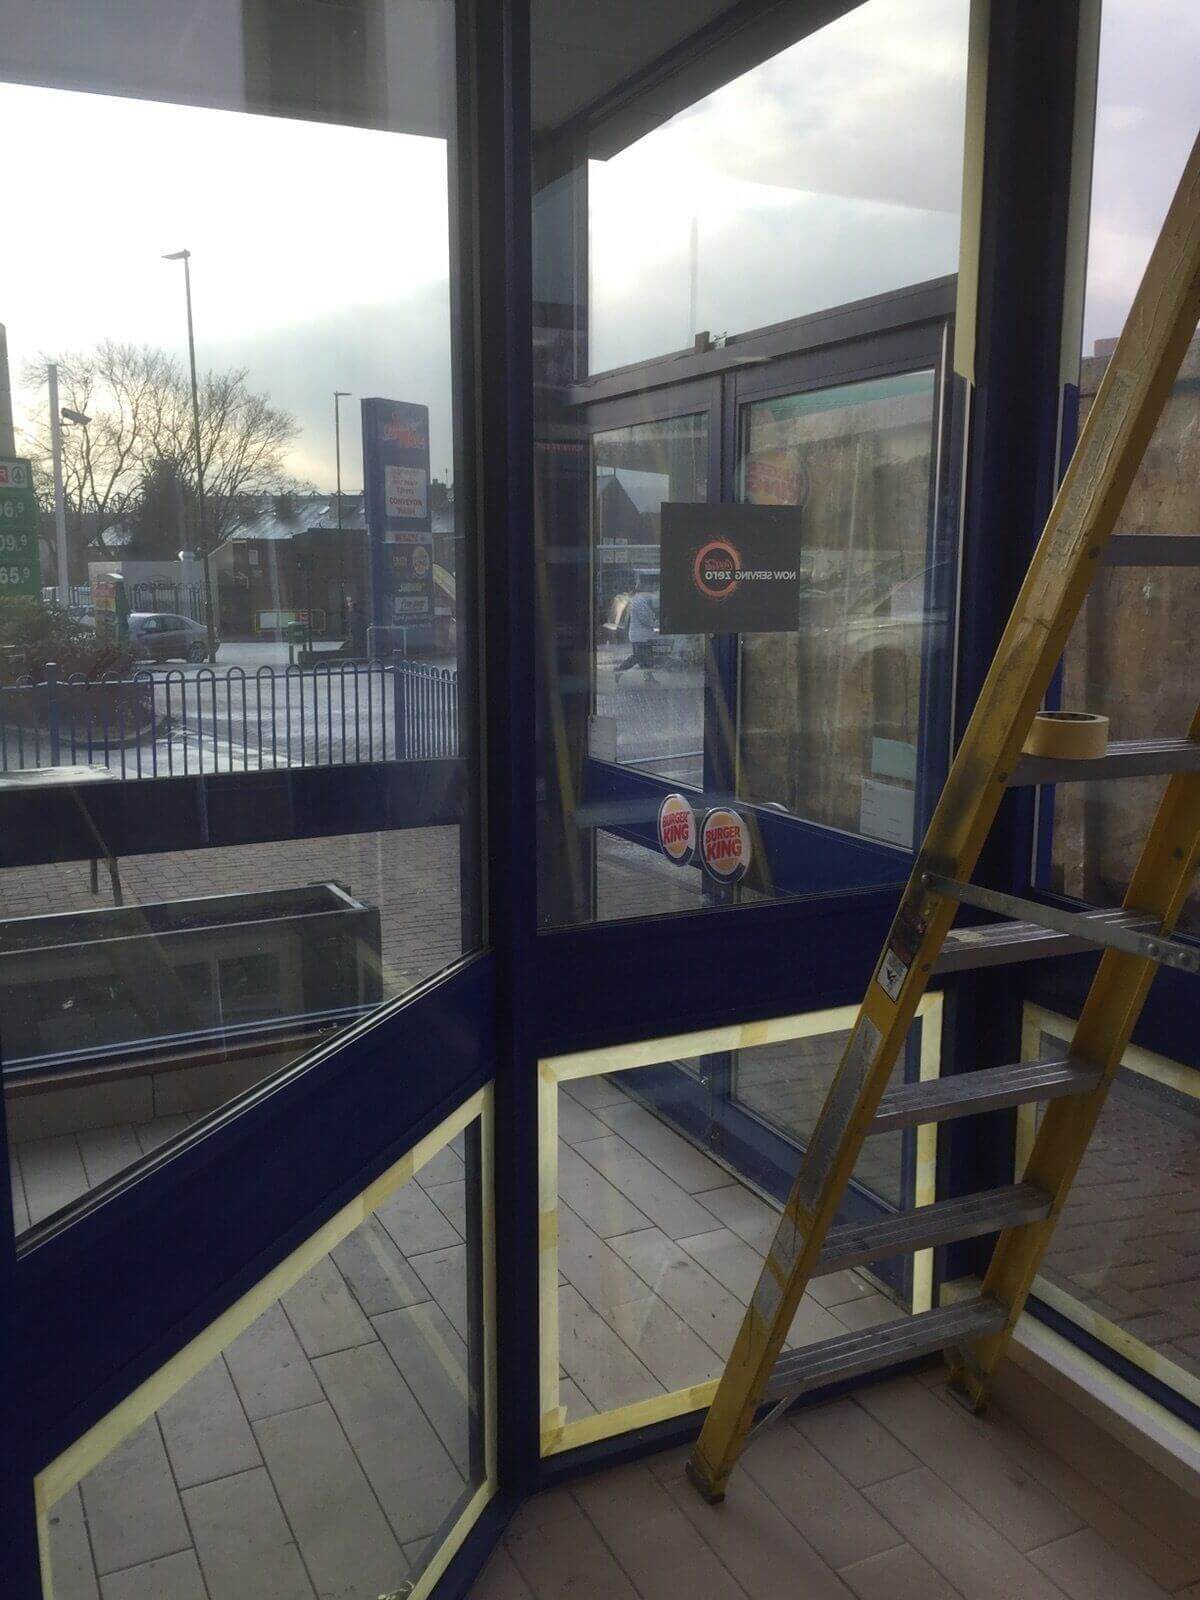 Shop Front Painting Sheffield